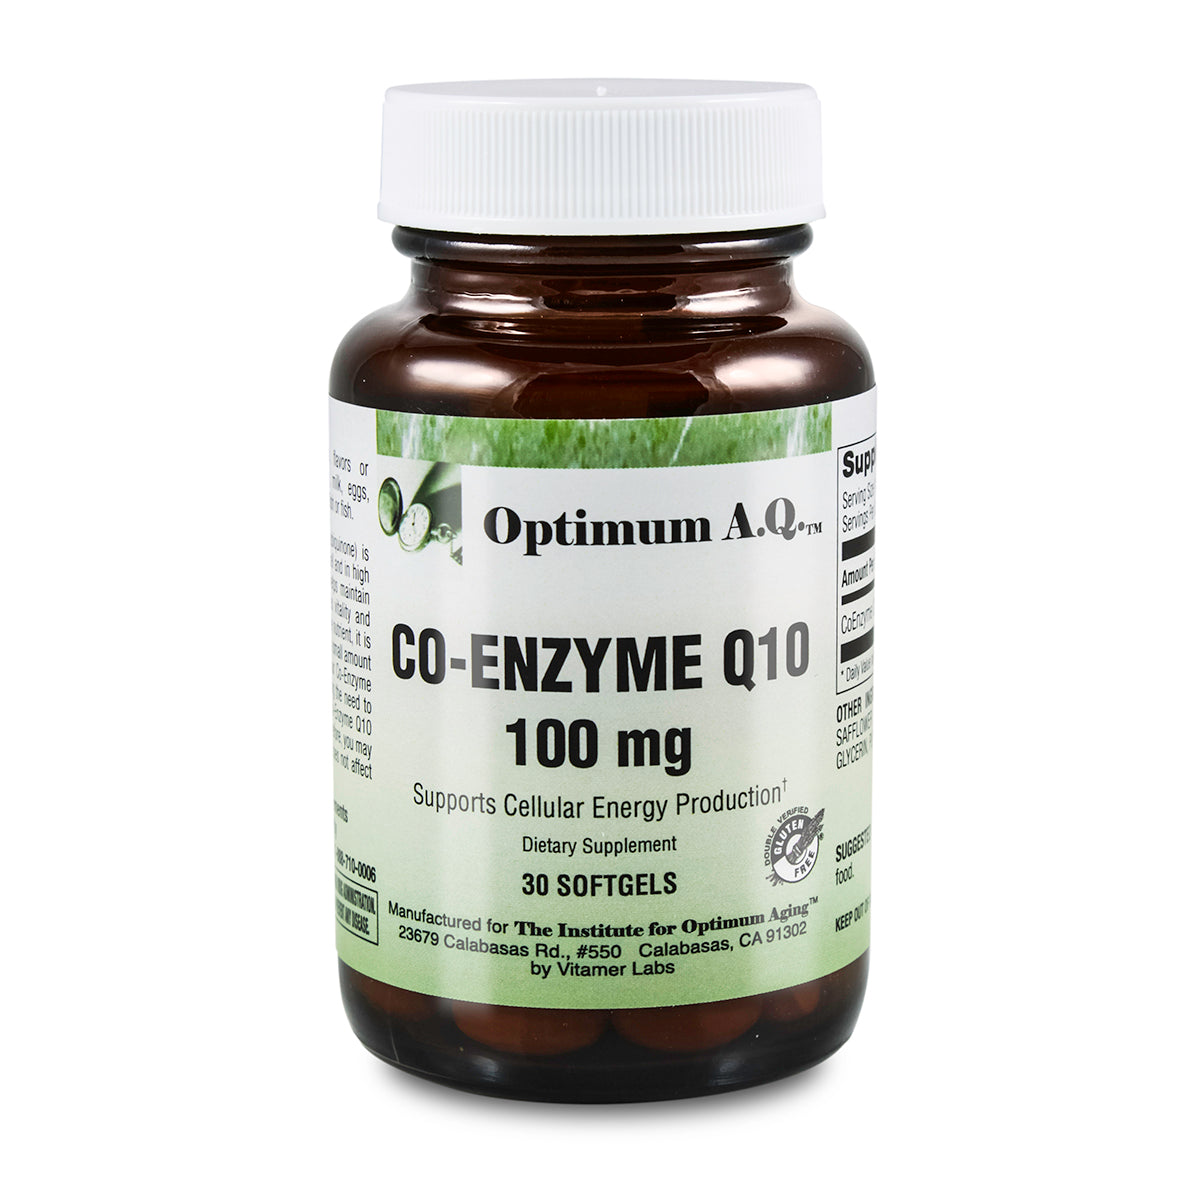 Co-Enzyme Q 100mg – The Institute for Optimum Aging